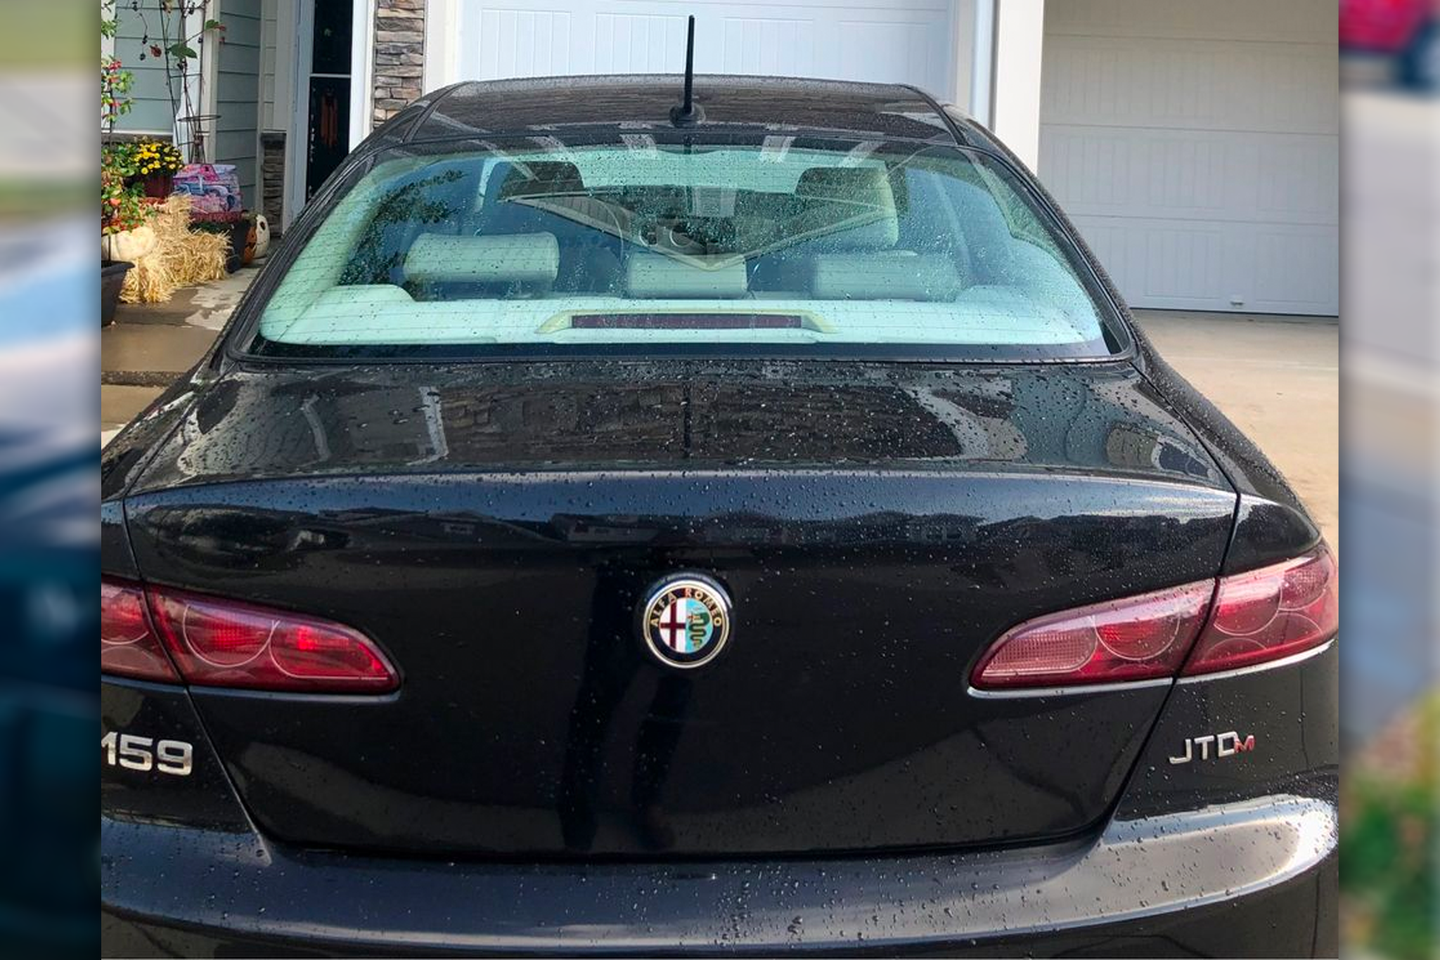 Supposedly Legal 2009 Alfa Romeo 159 For Sale Could Be Your Best